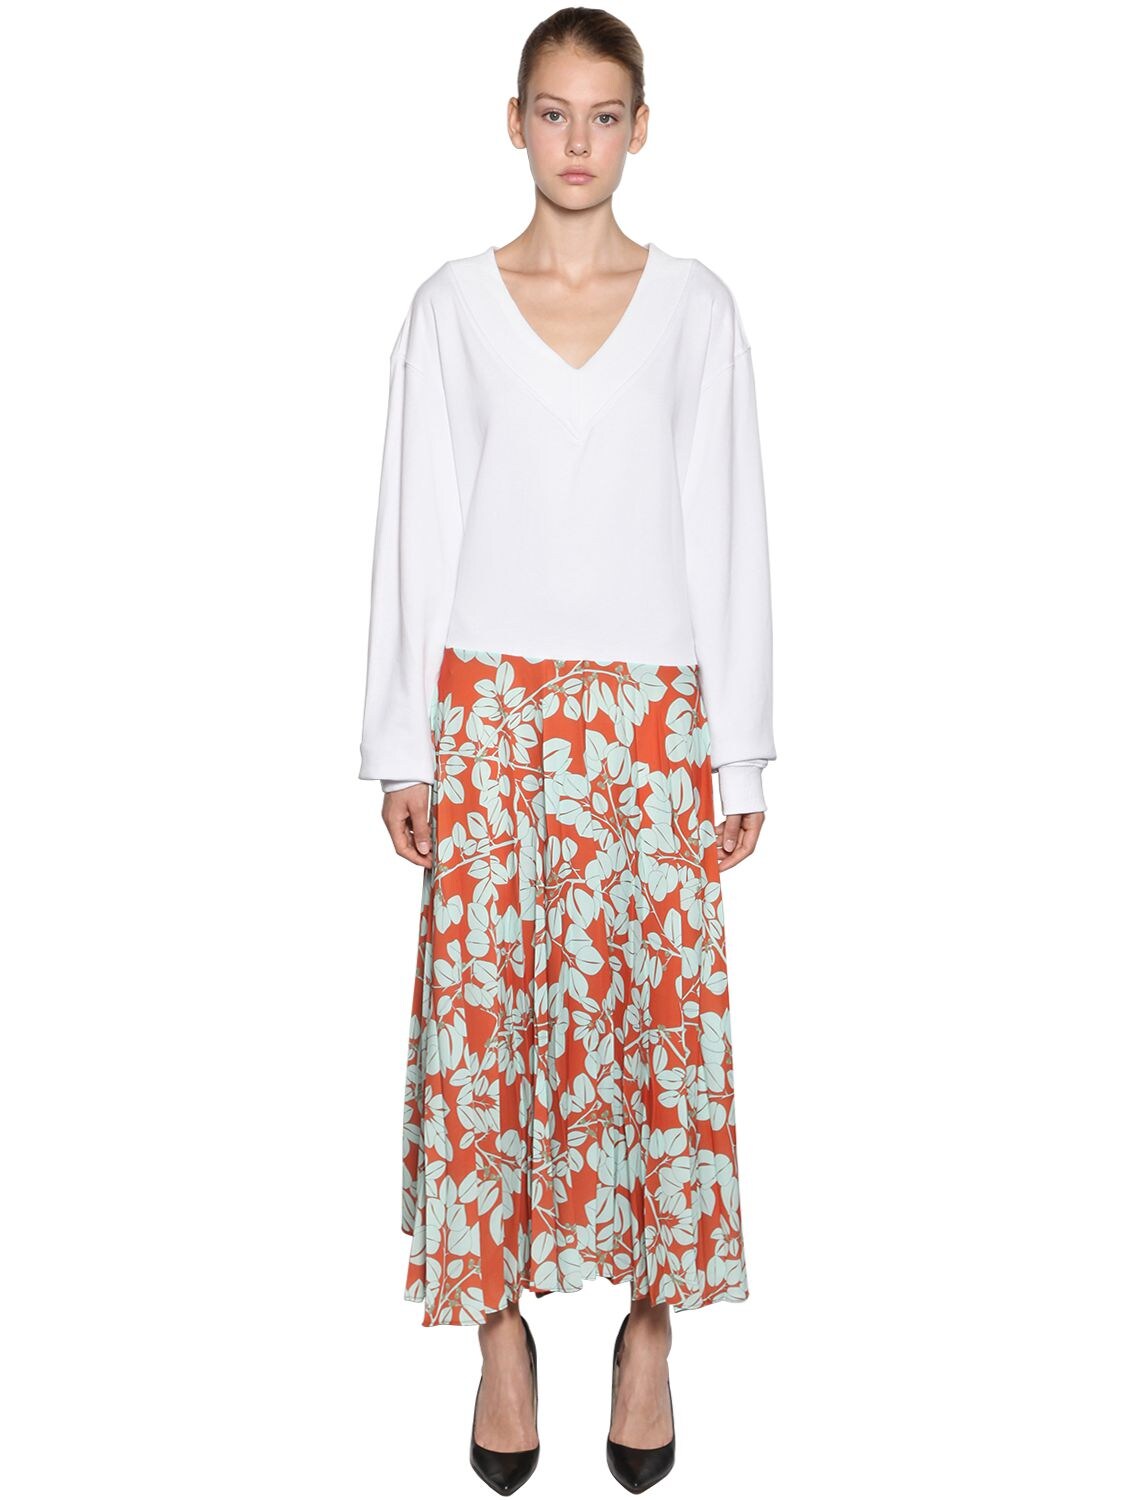 Act N°1 Pleated Skirt W/ Cotton Sweater Dress In White,orange